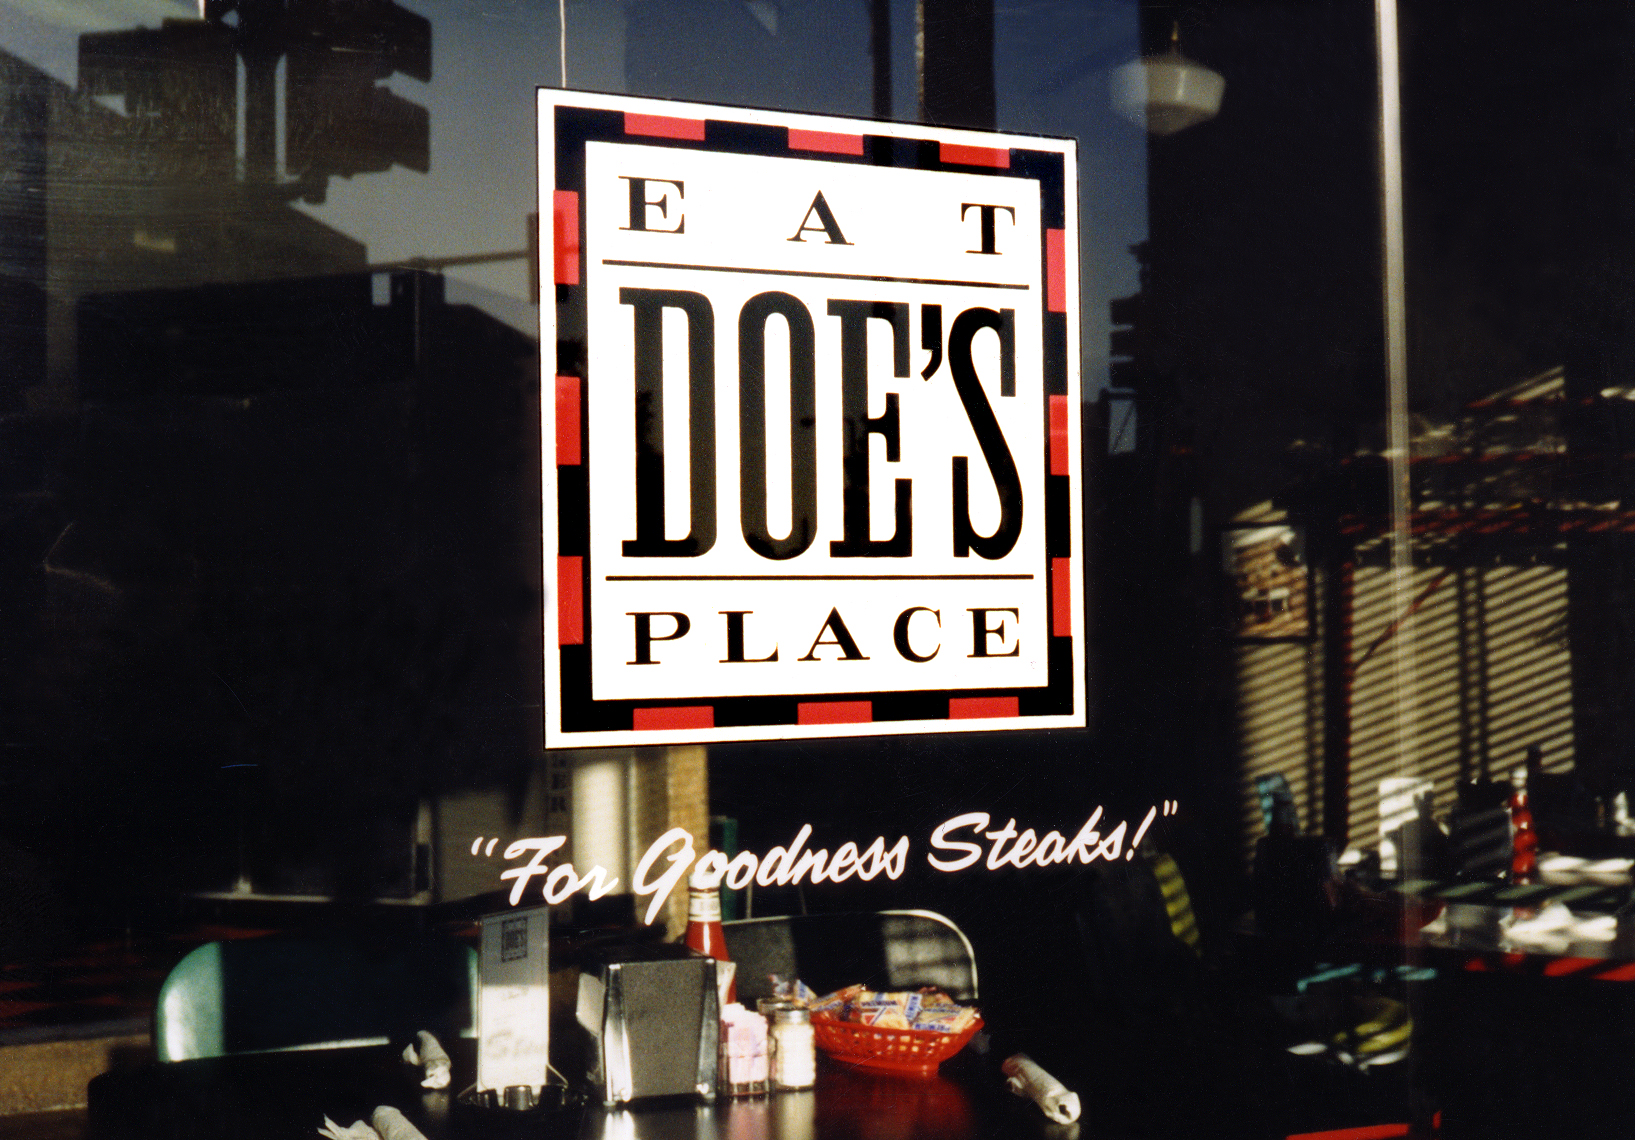  Original Does Eat Place Memphis logo  Branding creative and design by Chuck Mitchell  Elements later adapted for Blues City Cafe  Beale Street Memphis, Tennessee 